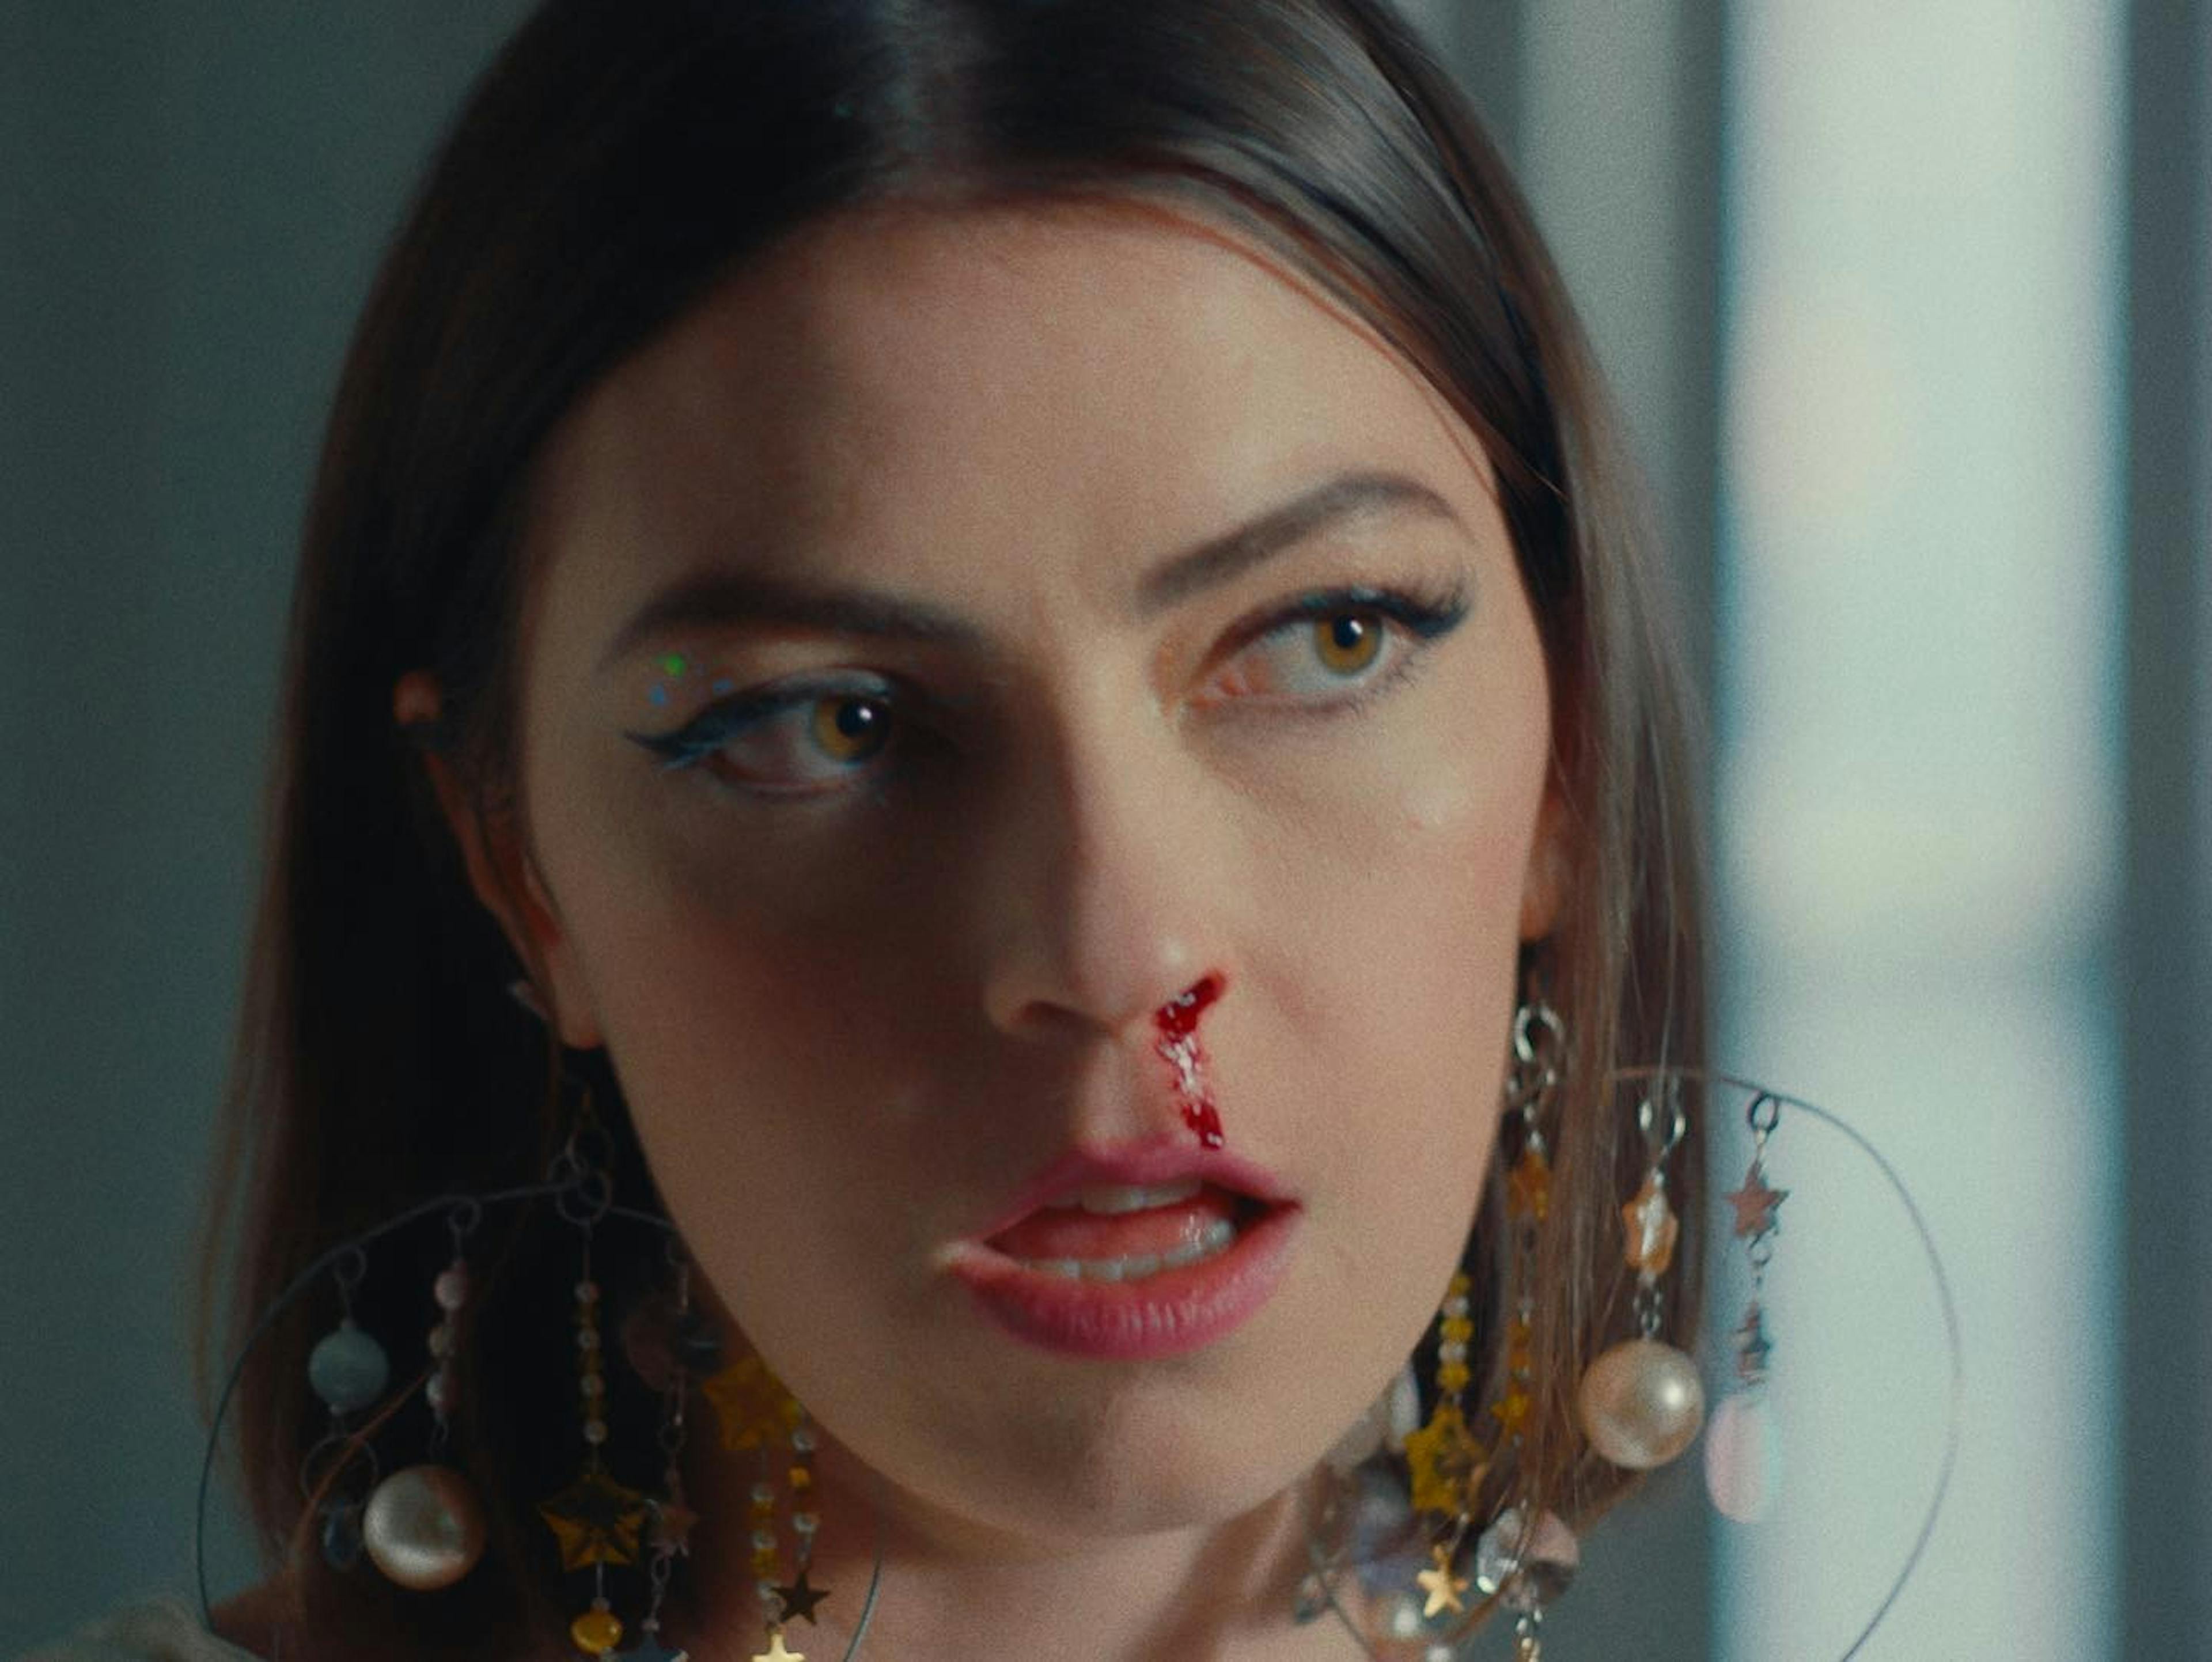 A close-up still from Anna Shoemaker's music video 'Everything Is Fine' shows the artist with a pensive expression. She has distinctive makeup with a blue winged eyeliner and a colorful dot near the corner of her eye. Large, ornate earrings with stars and pearls adorn her ears. There's a trickle of blood coming from her nostril, adding a dramatic and possibly symbolic element to the scene. Natural light from a window casts soft illumination on her face, highlighting her features against a neutral background.